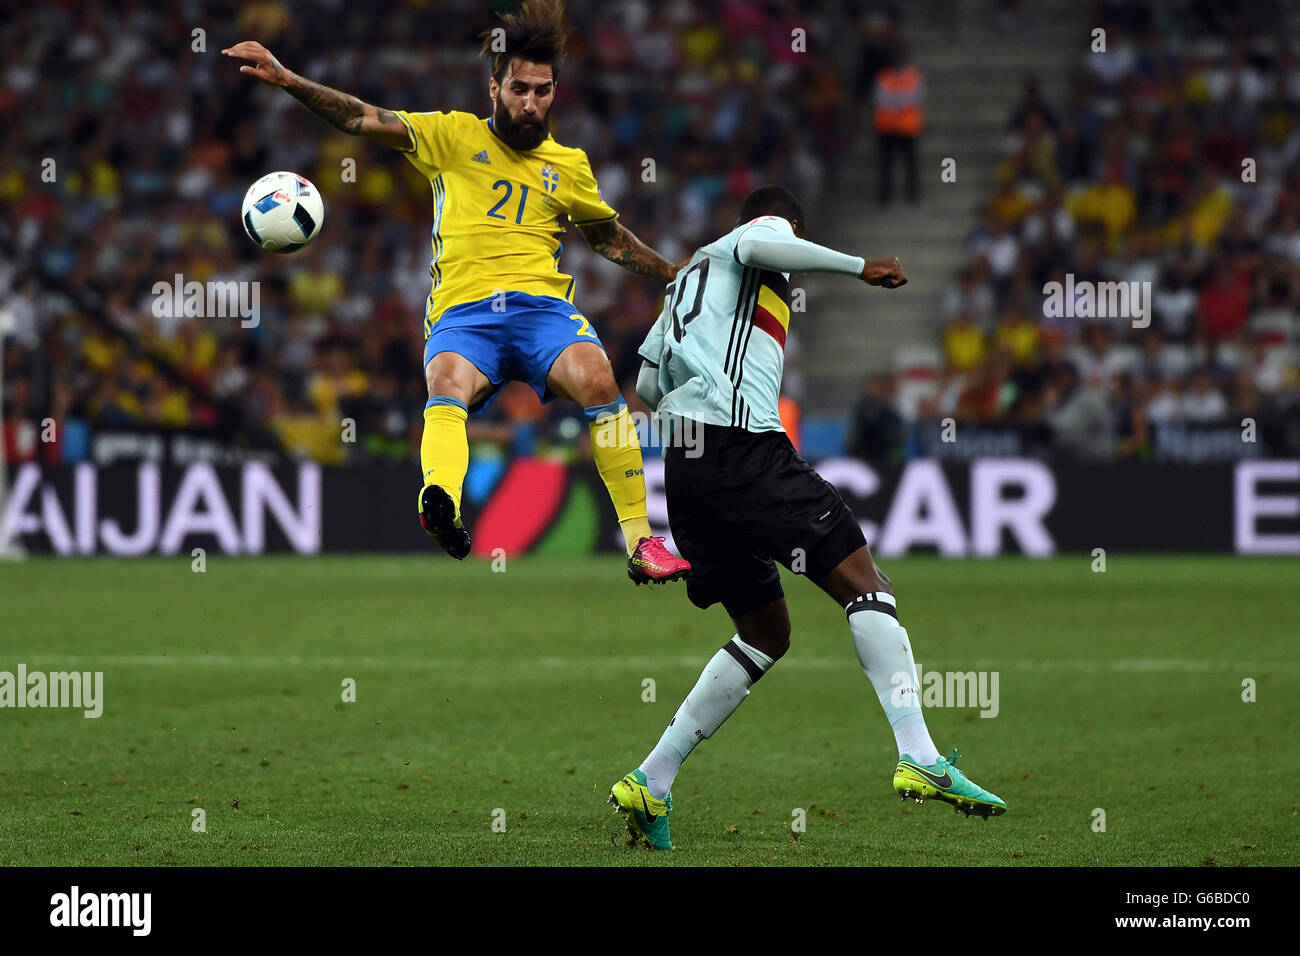 Nice, France. 22nd June, 2016. Sweden's Jimmy Durmaz (L) challenges for the ball with Belgium's Christian Benteke during the UEFA Euro 2016 Group E soccer match between Sweden vs at the Stade de Nice in Nice, France, 22 June 2016. At right German Referee Felix Brych. Photo: Federico Gambarini/dpa/Alamy Live News Stock Photo